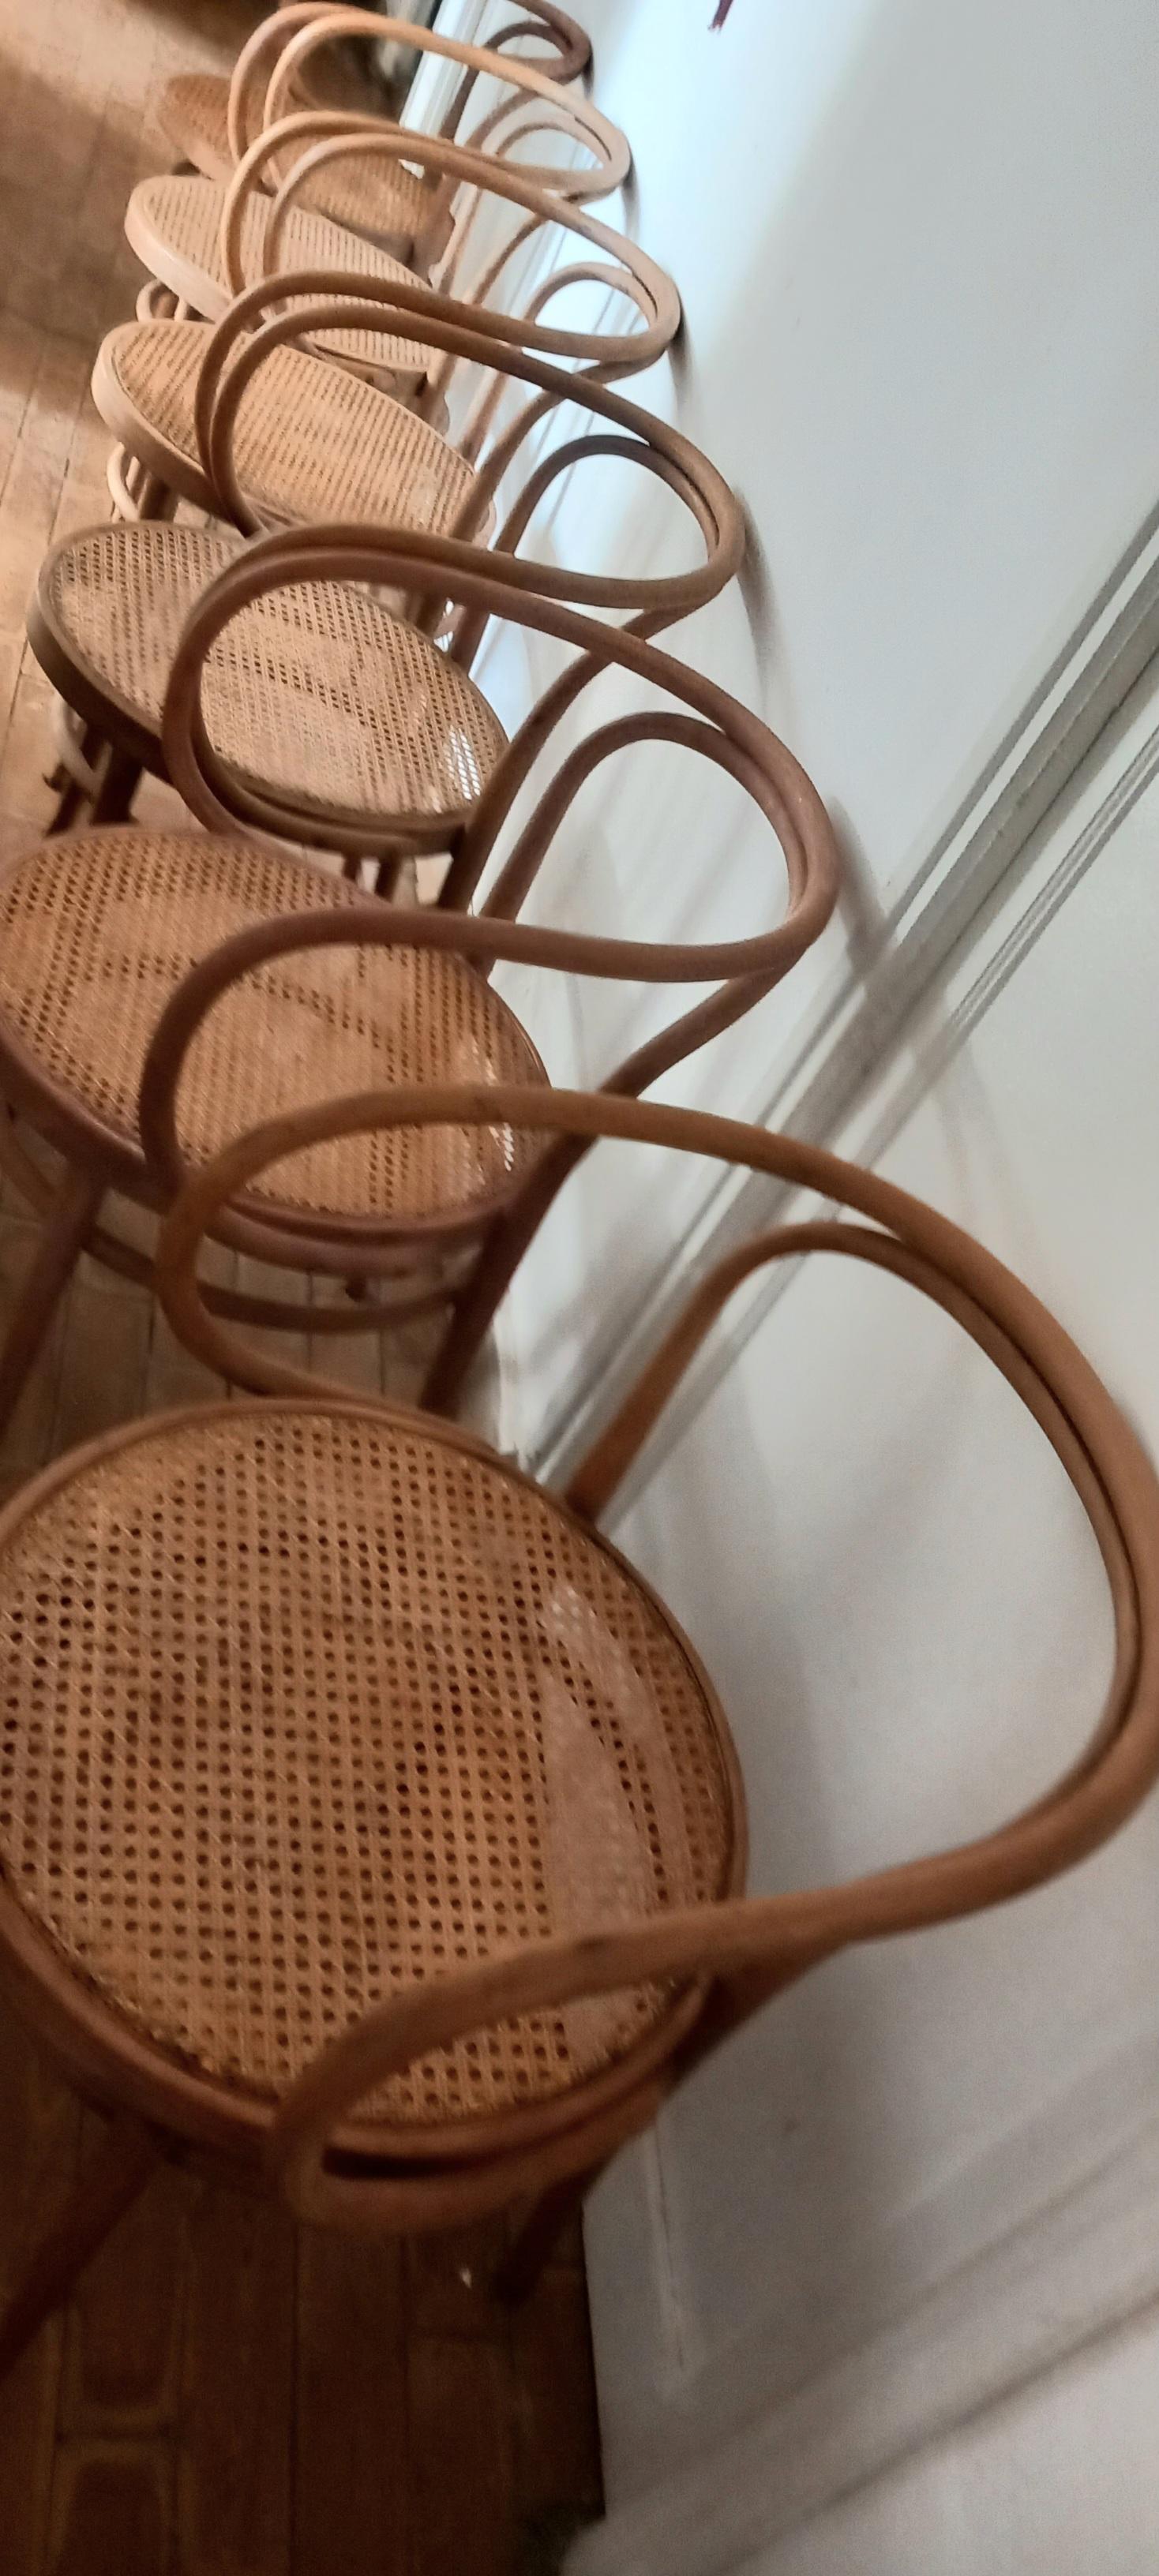 Six Midcentury Cane Bentwood Chair After Thonet 209, 1950s For Sale 1